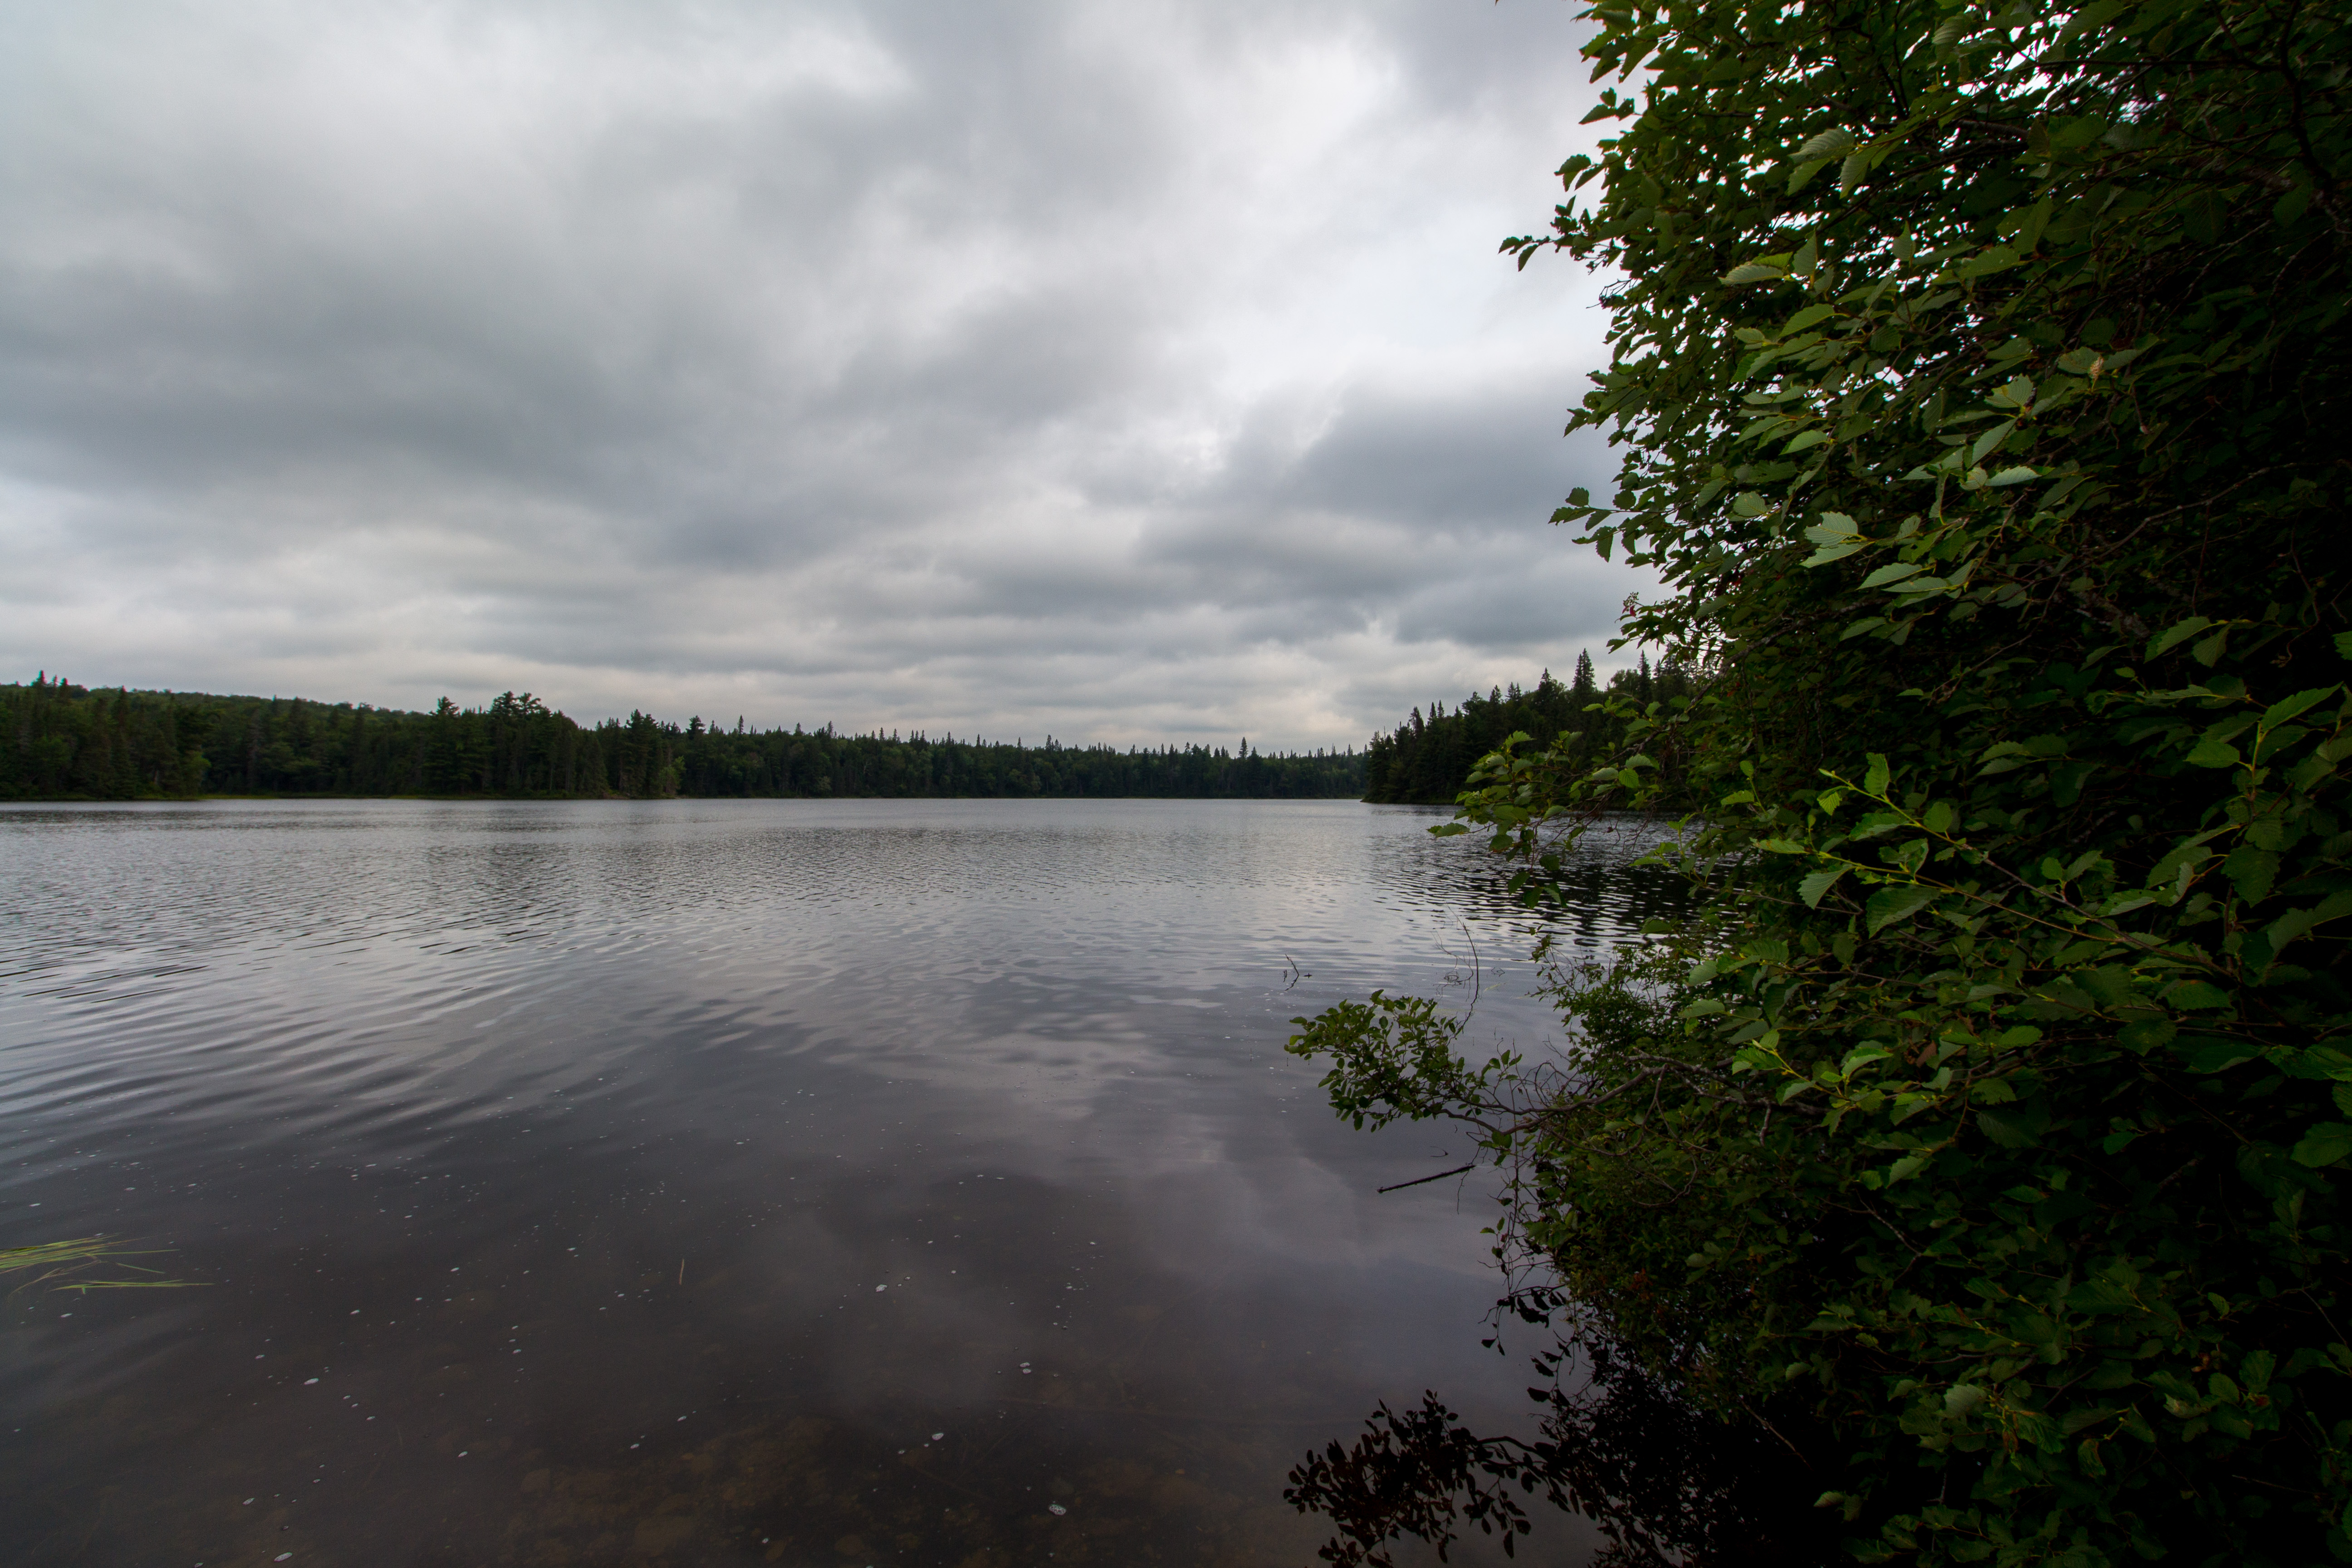 Looking out to Rain Lake from the Portage entrance to Little McCraney Lake